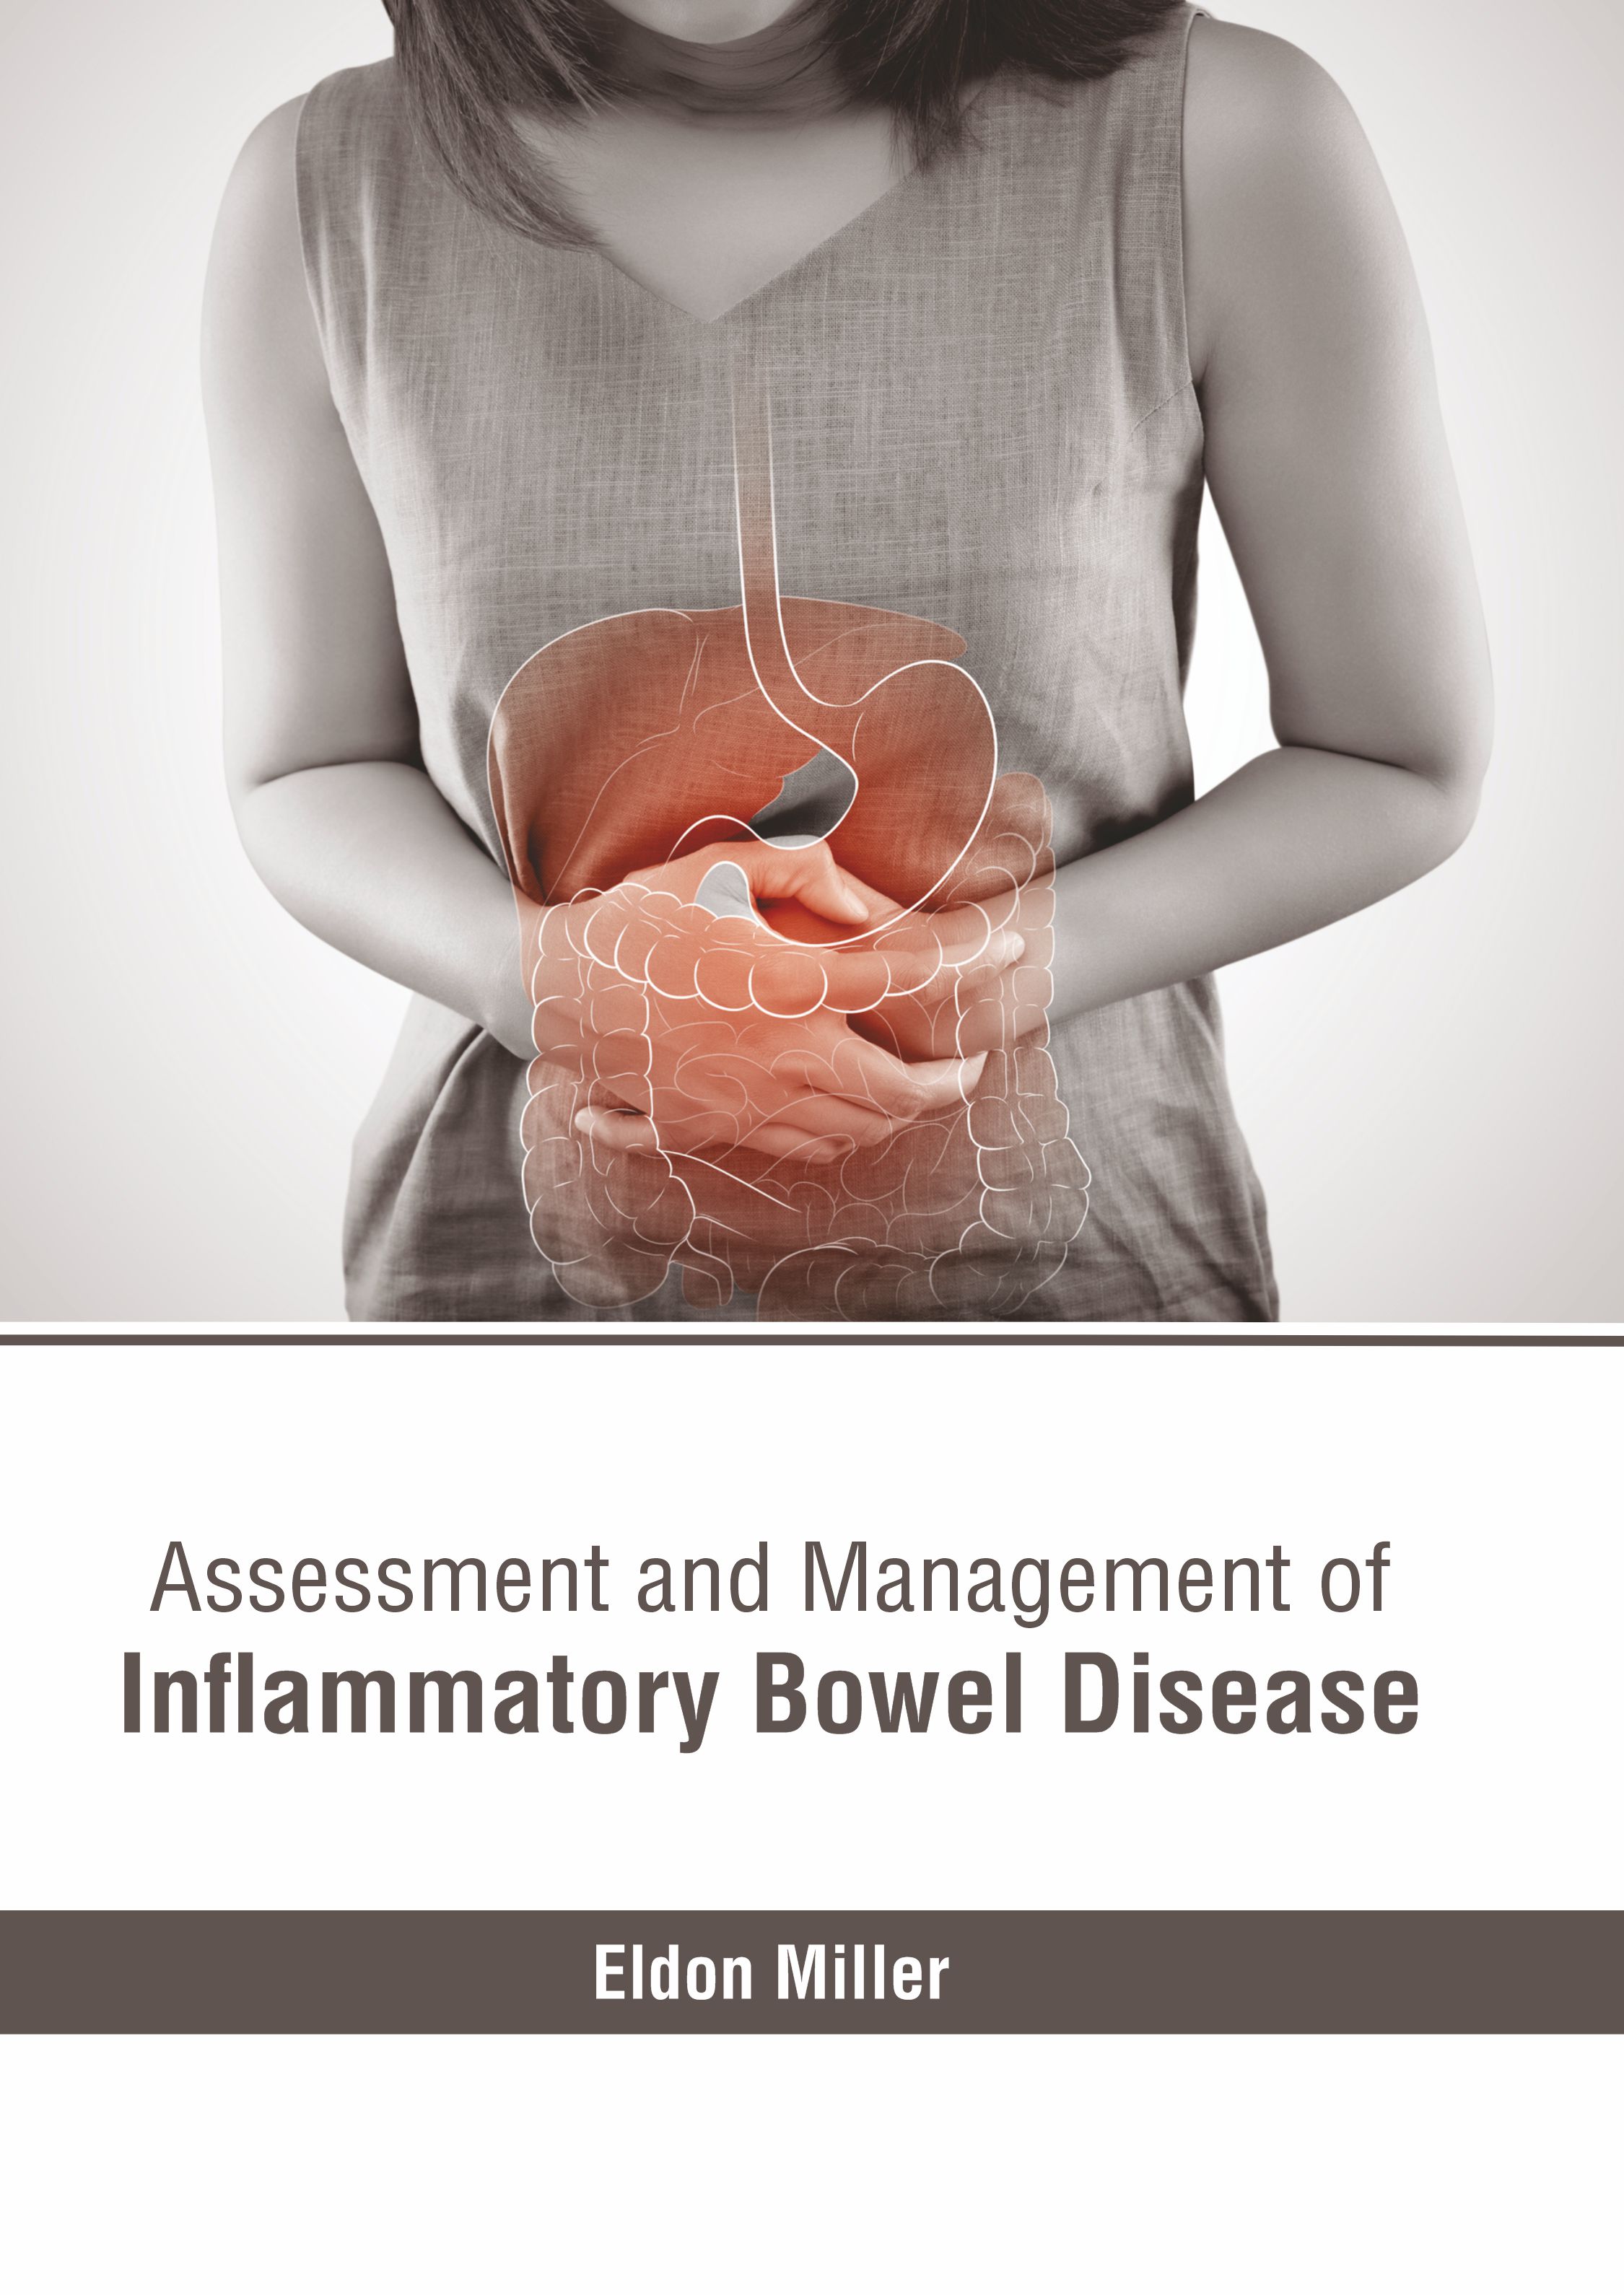 

exclusive-publishers/american-medical-publishers/assessment-and-management-of-inflammatory-bowel-disease-9781639271313